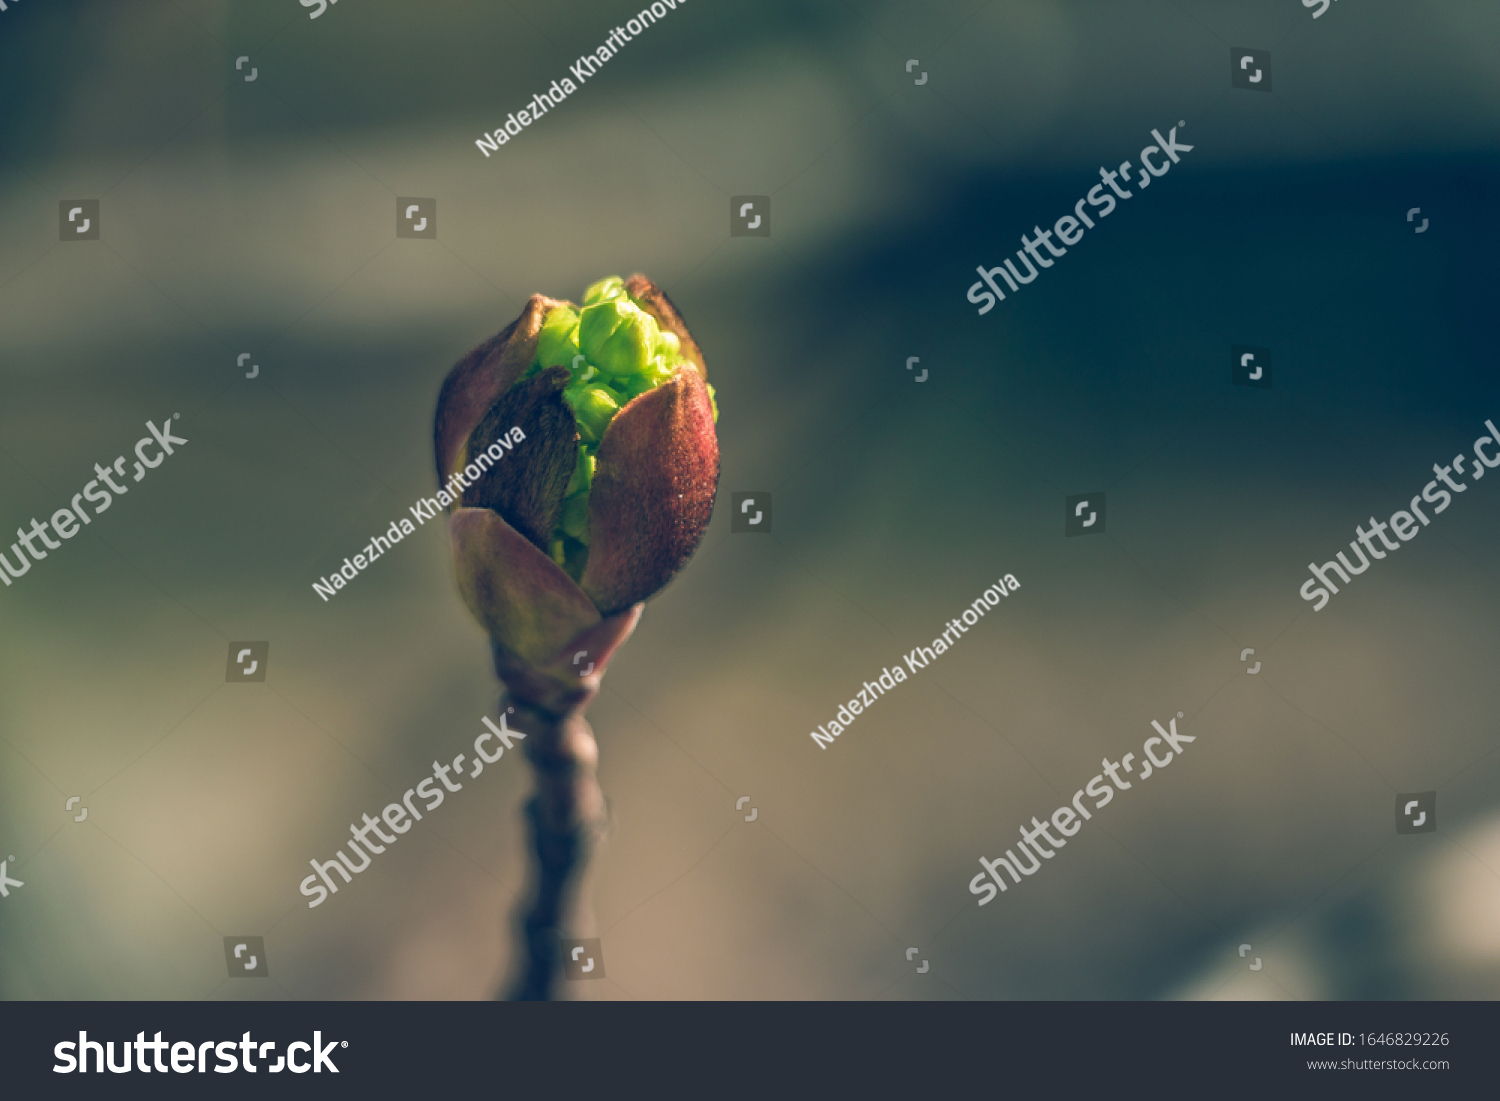 Tree buds in spring. Young large buds on branches against blurred background under the bright sun. Beautiful Fresh spring Natural background. Sunny day. View close up. One single bud for spring theme. #1646829226